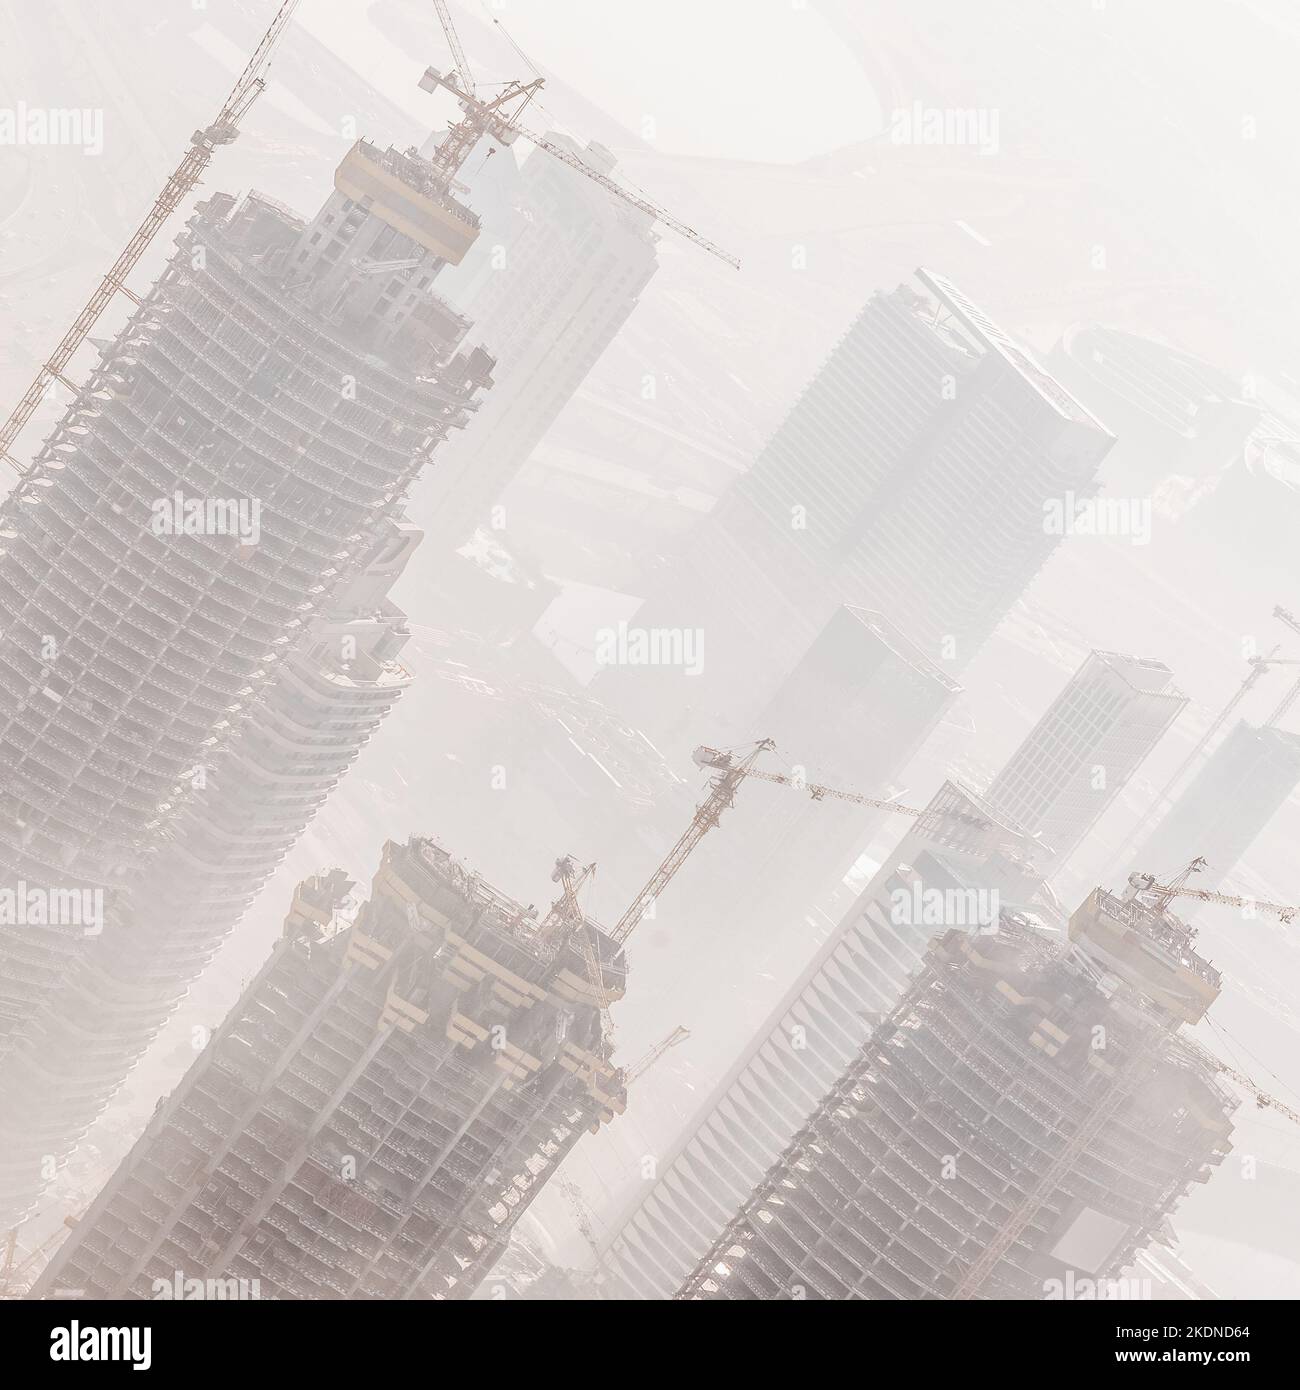 Huge skyscrappers construction site with cranes on top of buildings. Rapid urban and construction sector development or inflation of real estate bubble. Stock Photo